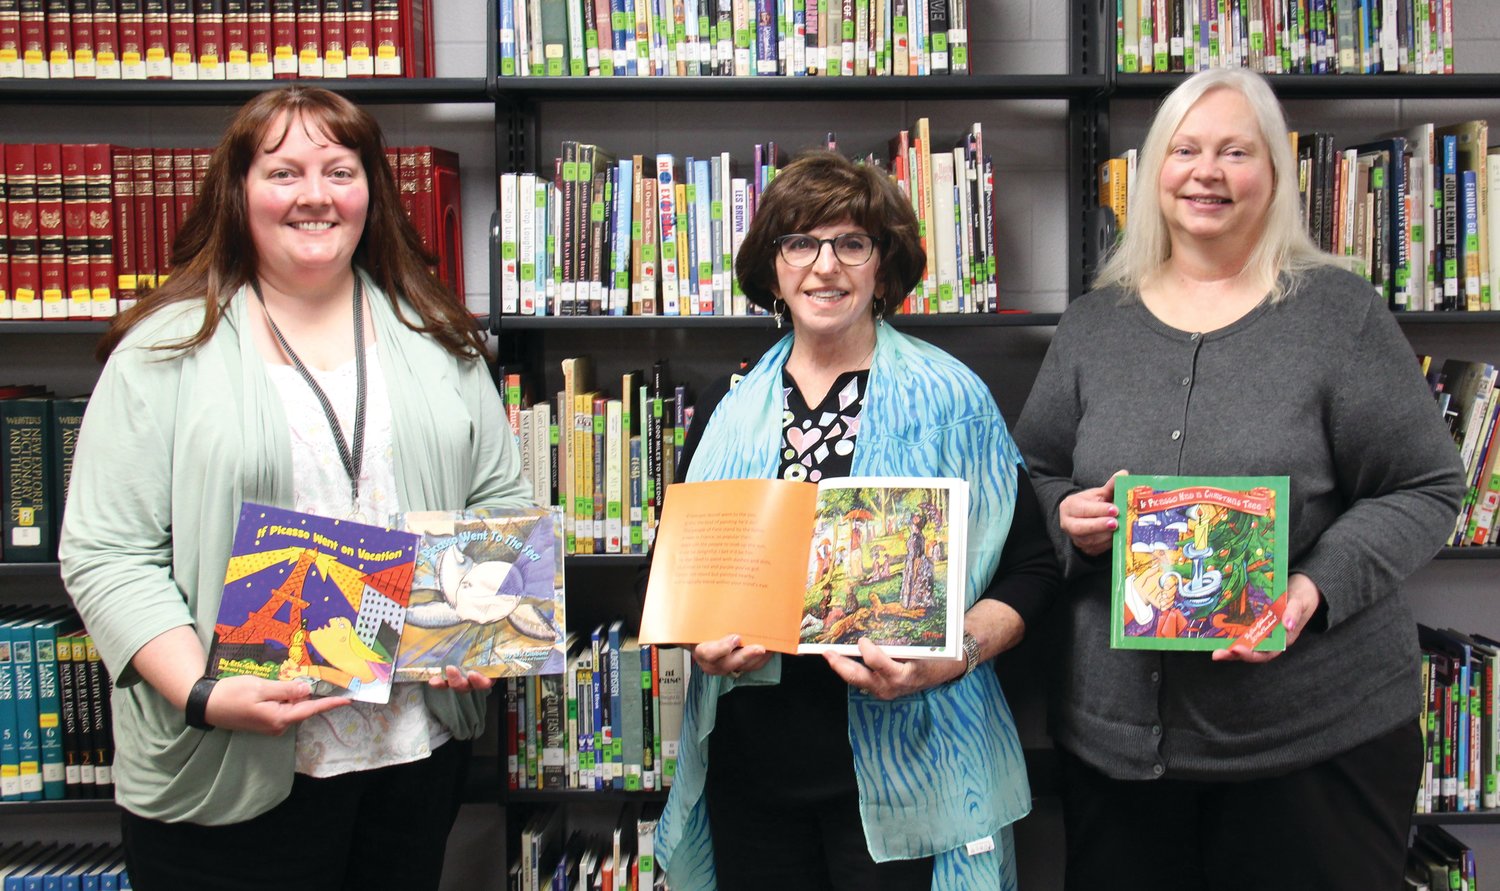 Pictured are Jennifer Schlatter, NCP media specialist; Connie McClure, PHMS art teacher; and Vicki Harbison, PHMS media assistant.